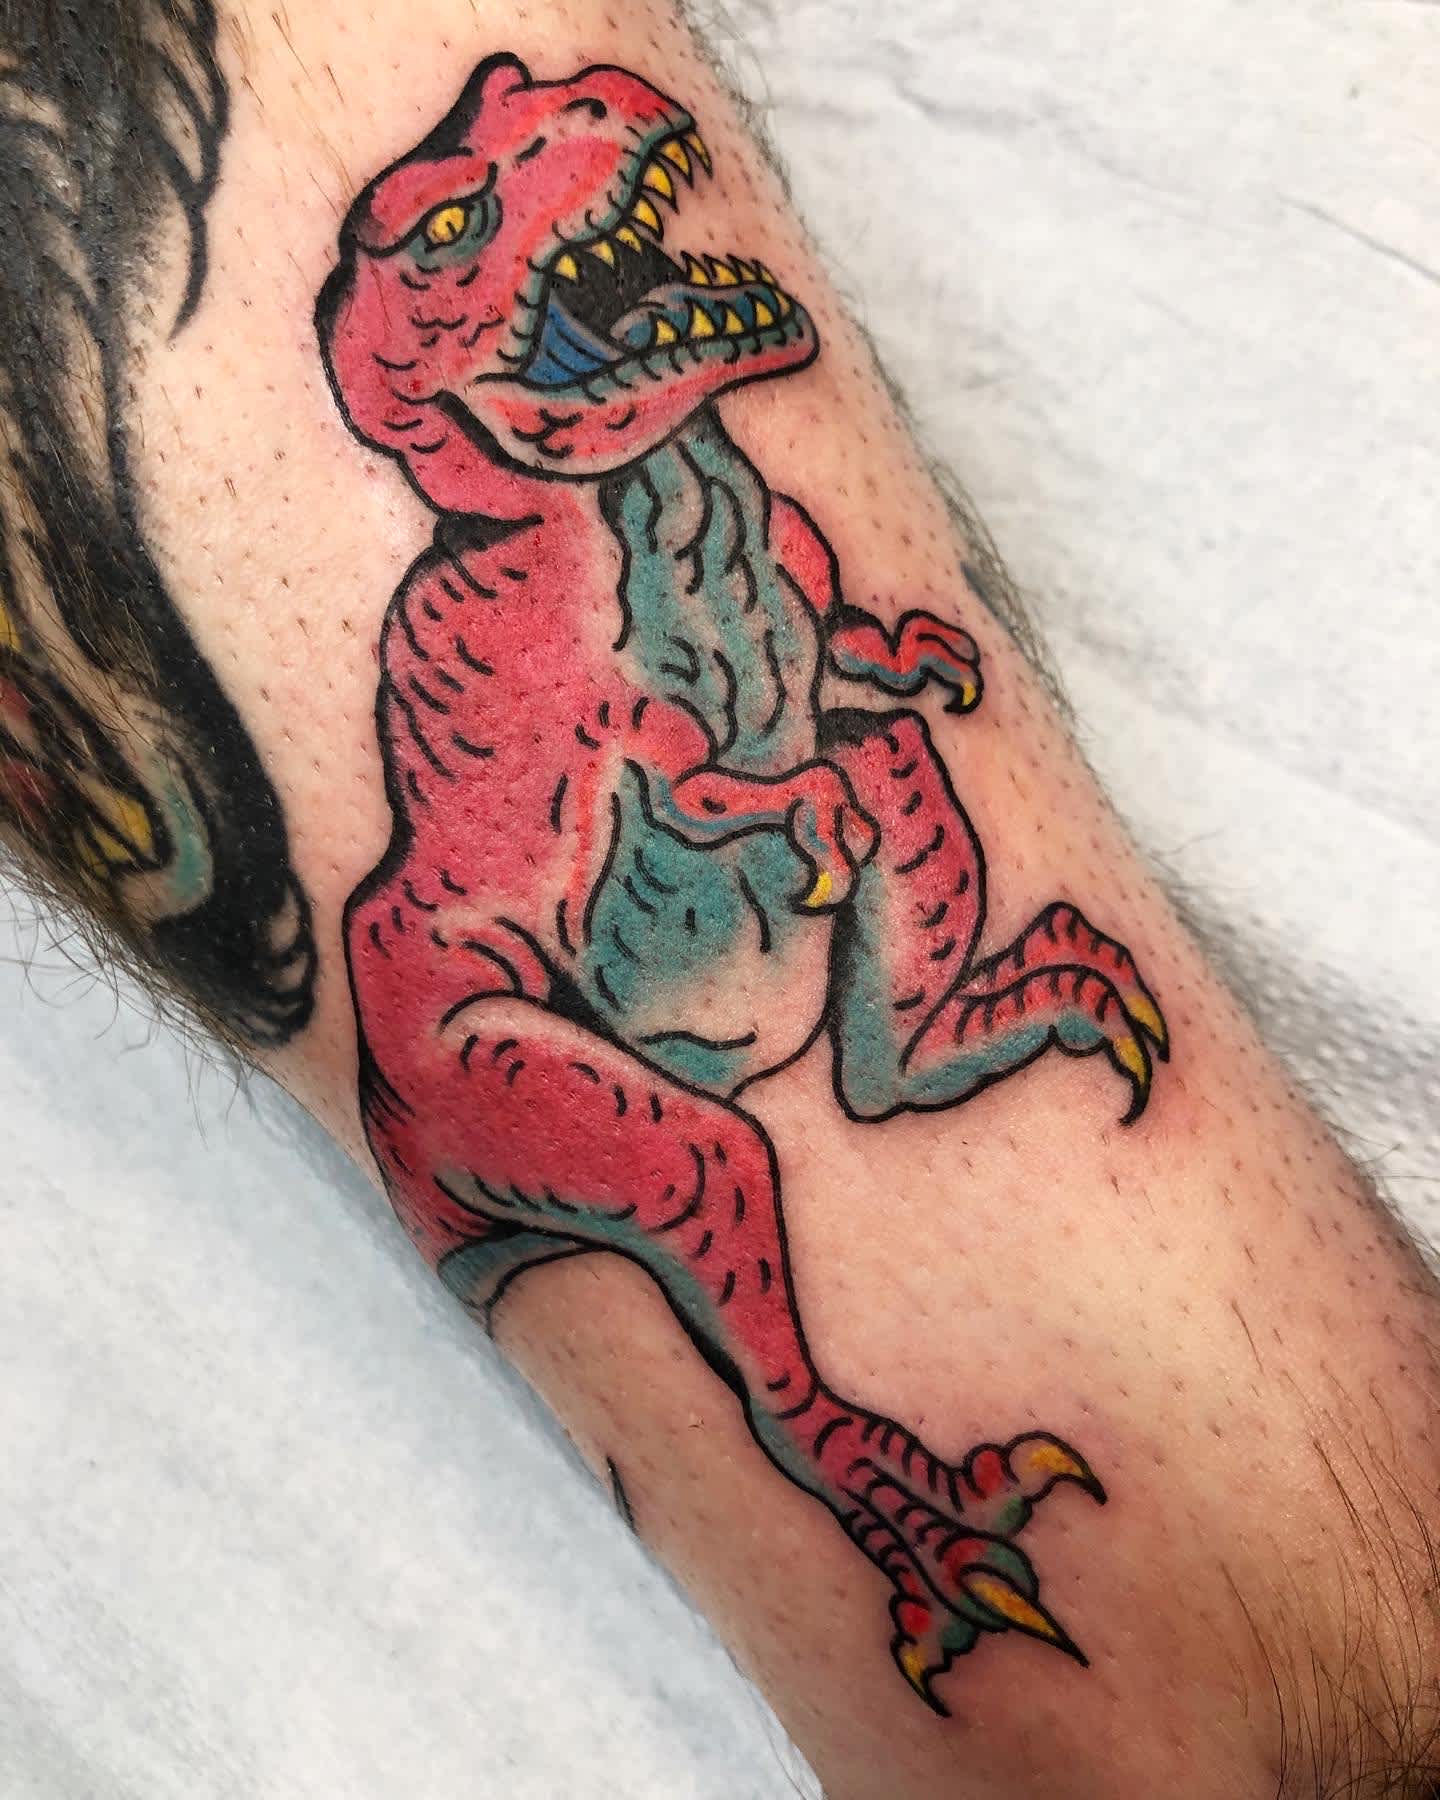 Full color portrait of a t-rex coloured in neon pink and blue on the lower calf.